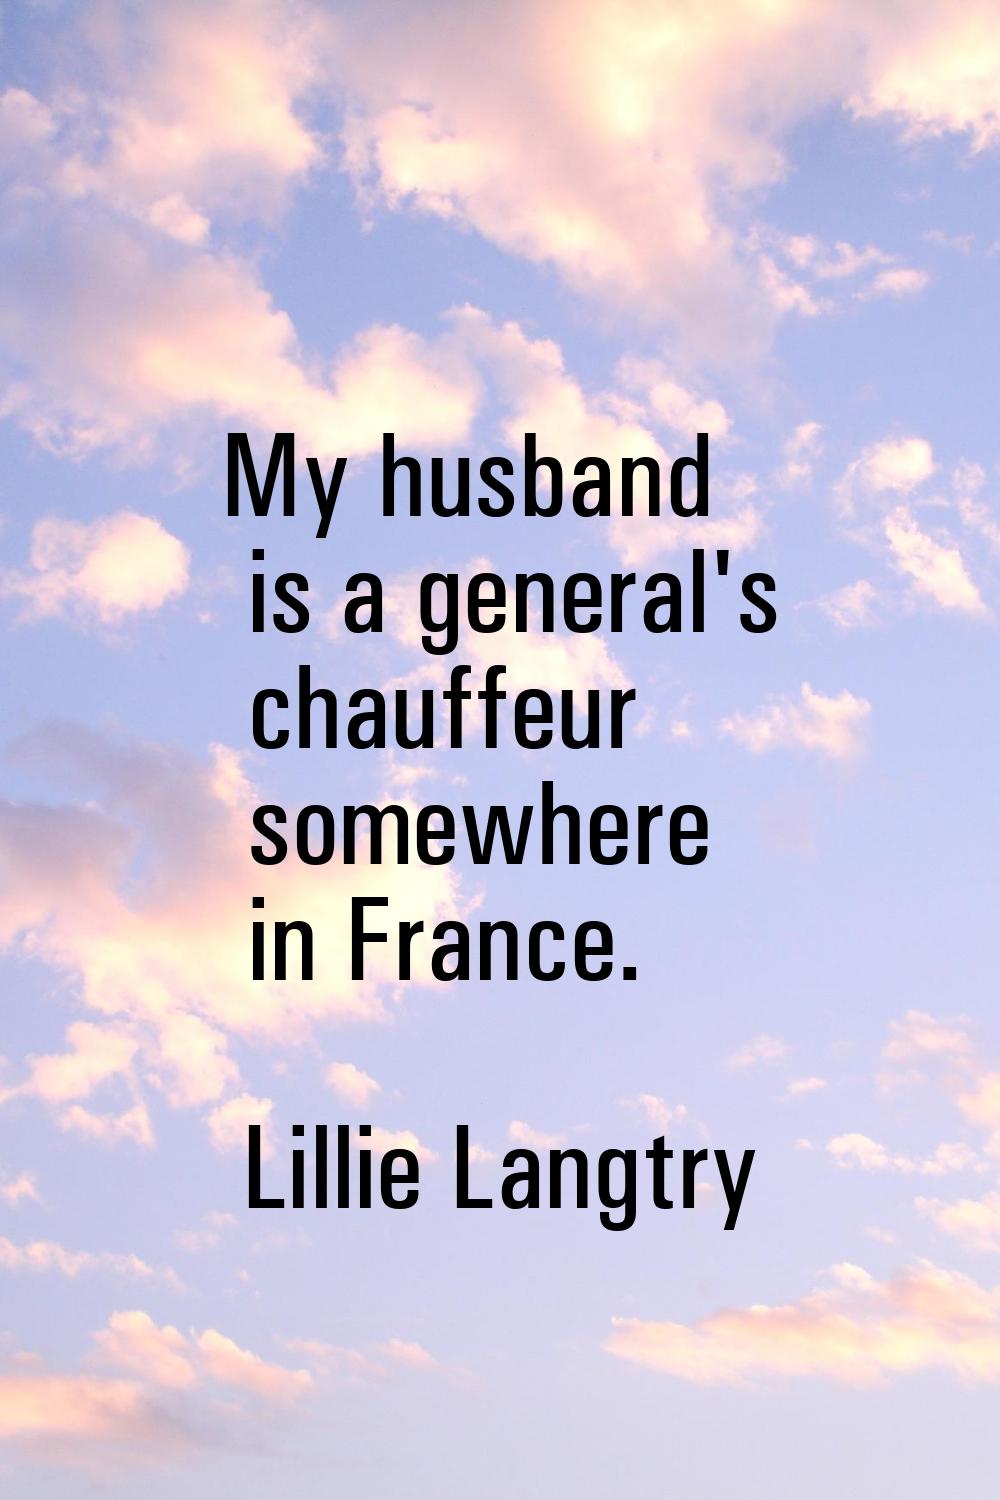 My husband is a general's chauffeur somewhere in France.